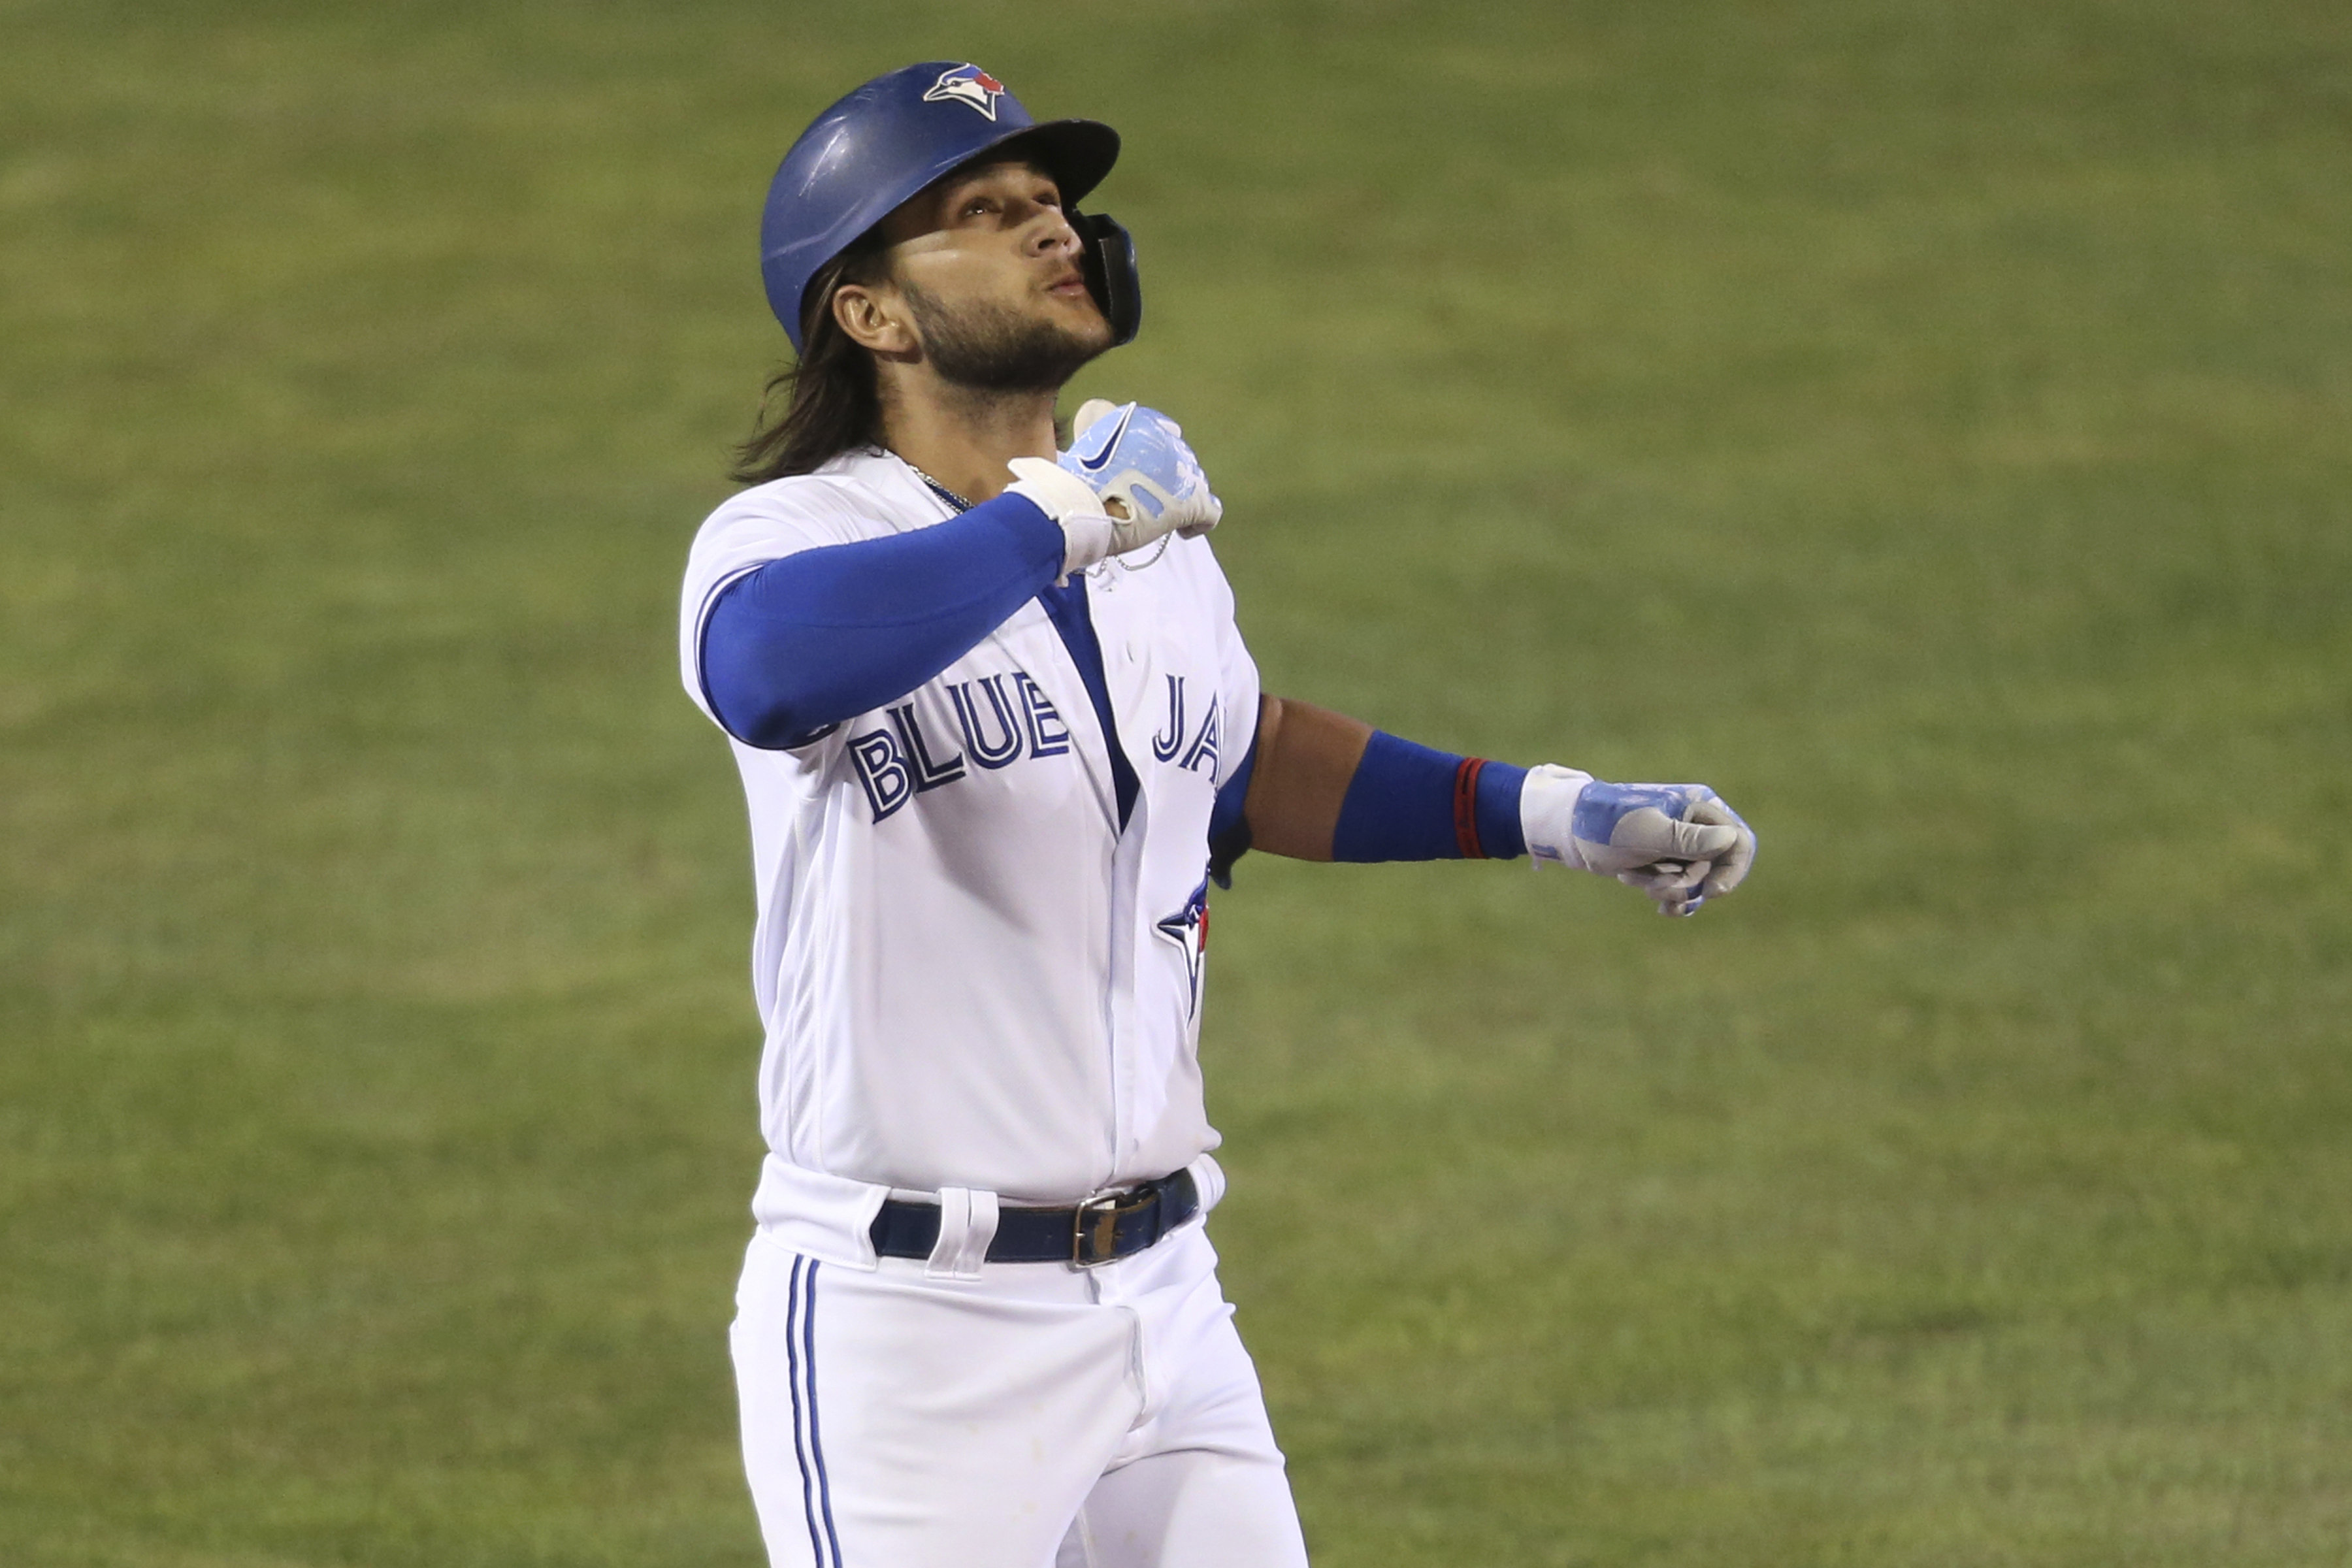 Blue Jays lose young star Bichette to injury  and suspended game to Rays